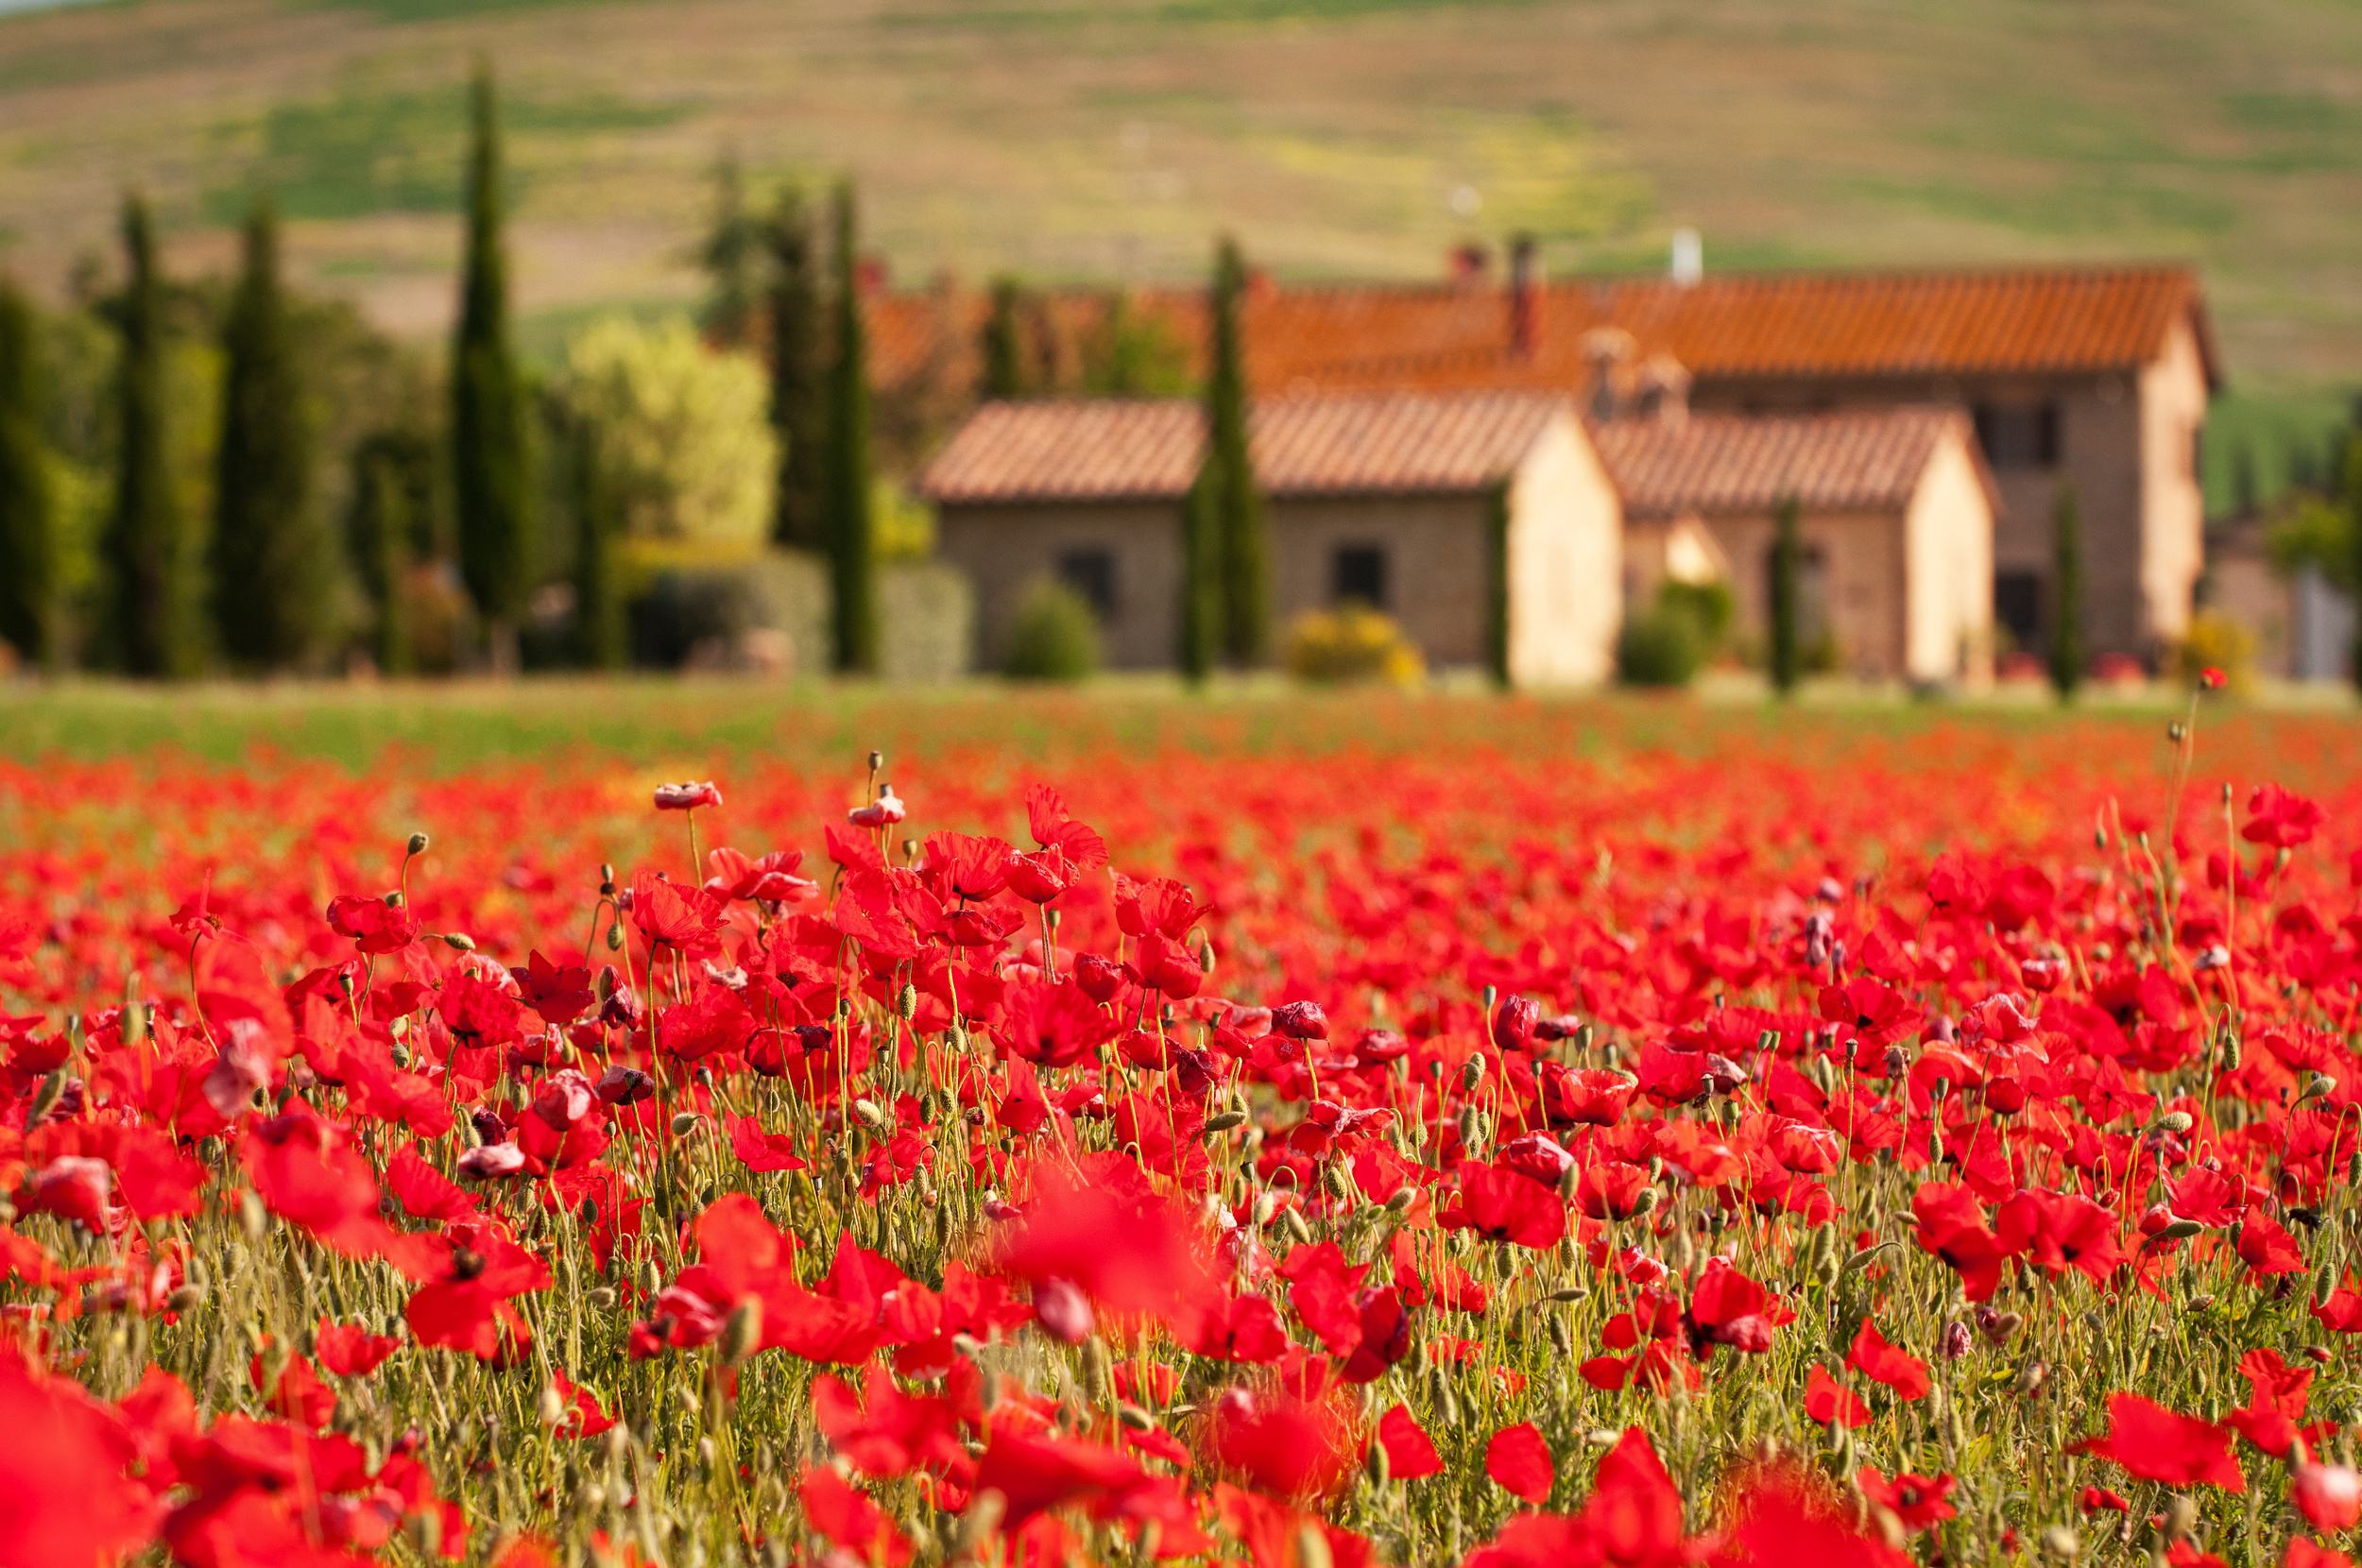 <p>Dreams of Tuscany typically conjure up images of endless verdant hills and those iconic Cypress and Umbrella Pine trees. However, starting in late April, poppies bloom all over the countryside, inviting visitors to admire the landscape.</p><p><a href='https://www.msn.com/en-us/community/channel/vid-cj9pqbr0vn9in2b6ddcd8sfgpfq6x6utp44fssrv6mc2gtybw0us'>Follow us on MSN to see more of our exclusive lifestyle content.</a></p>